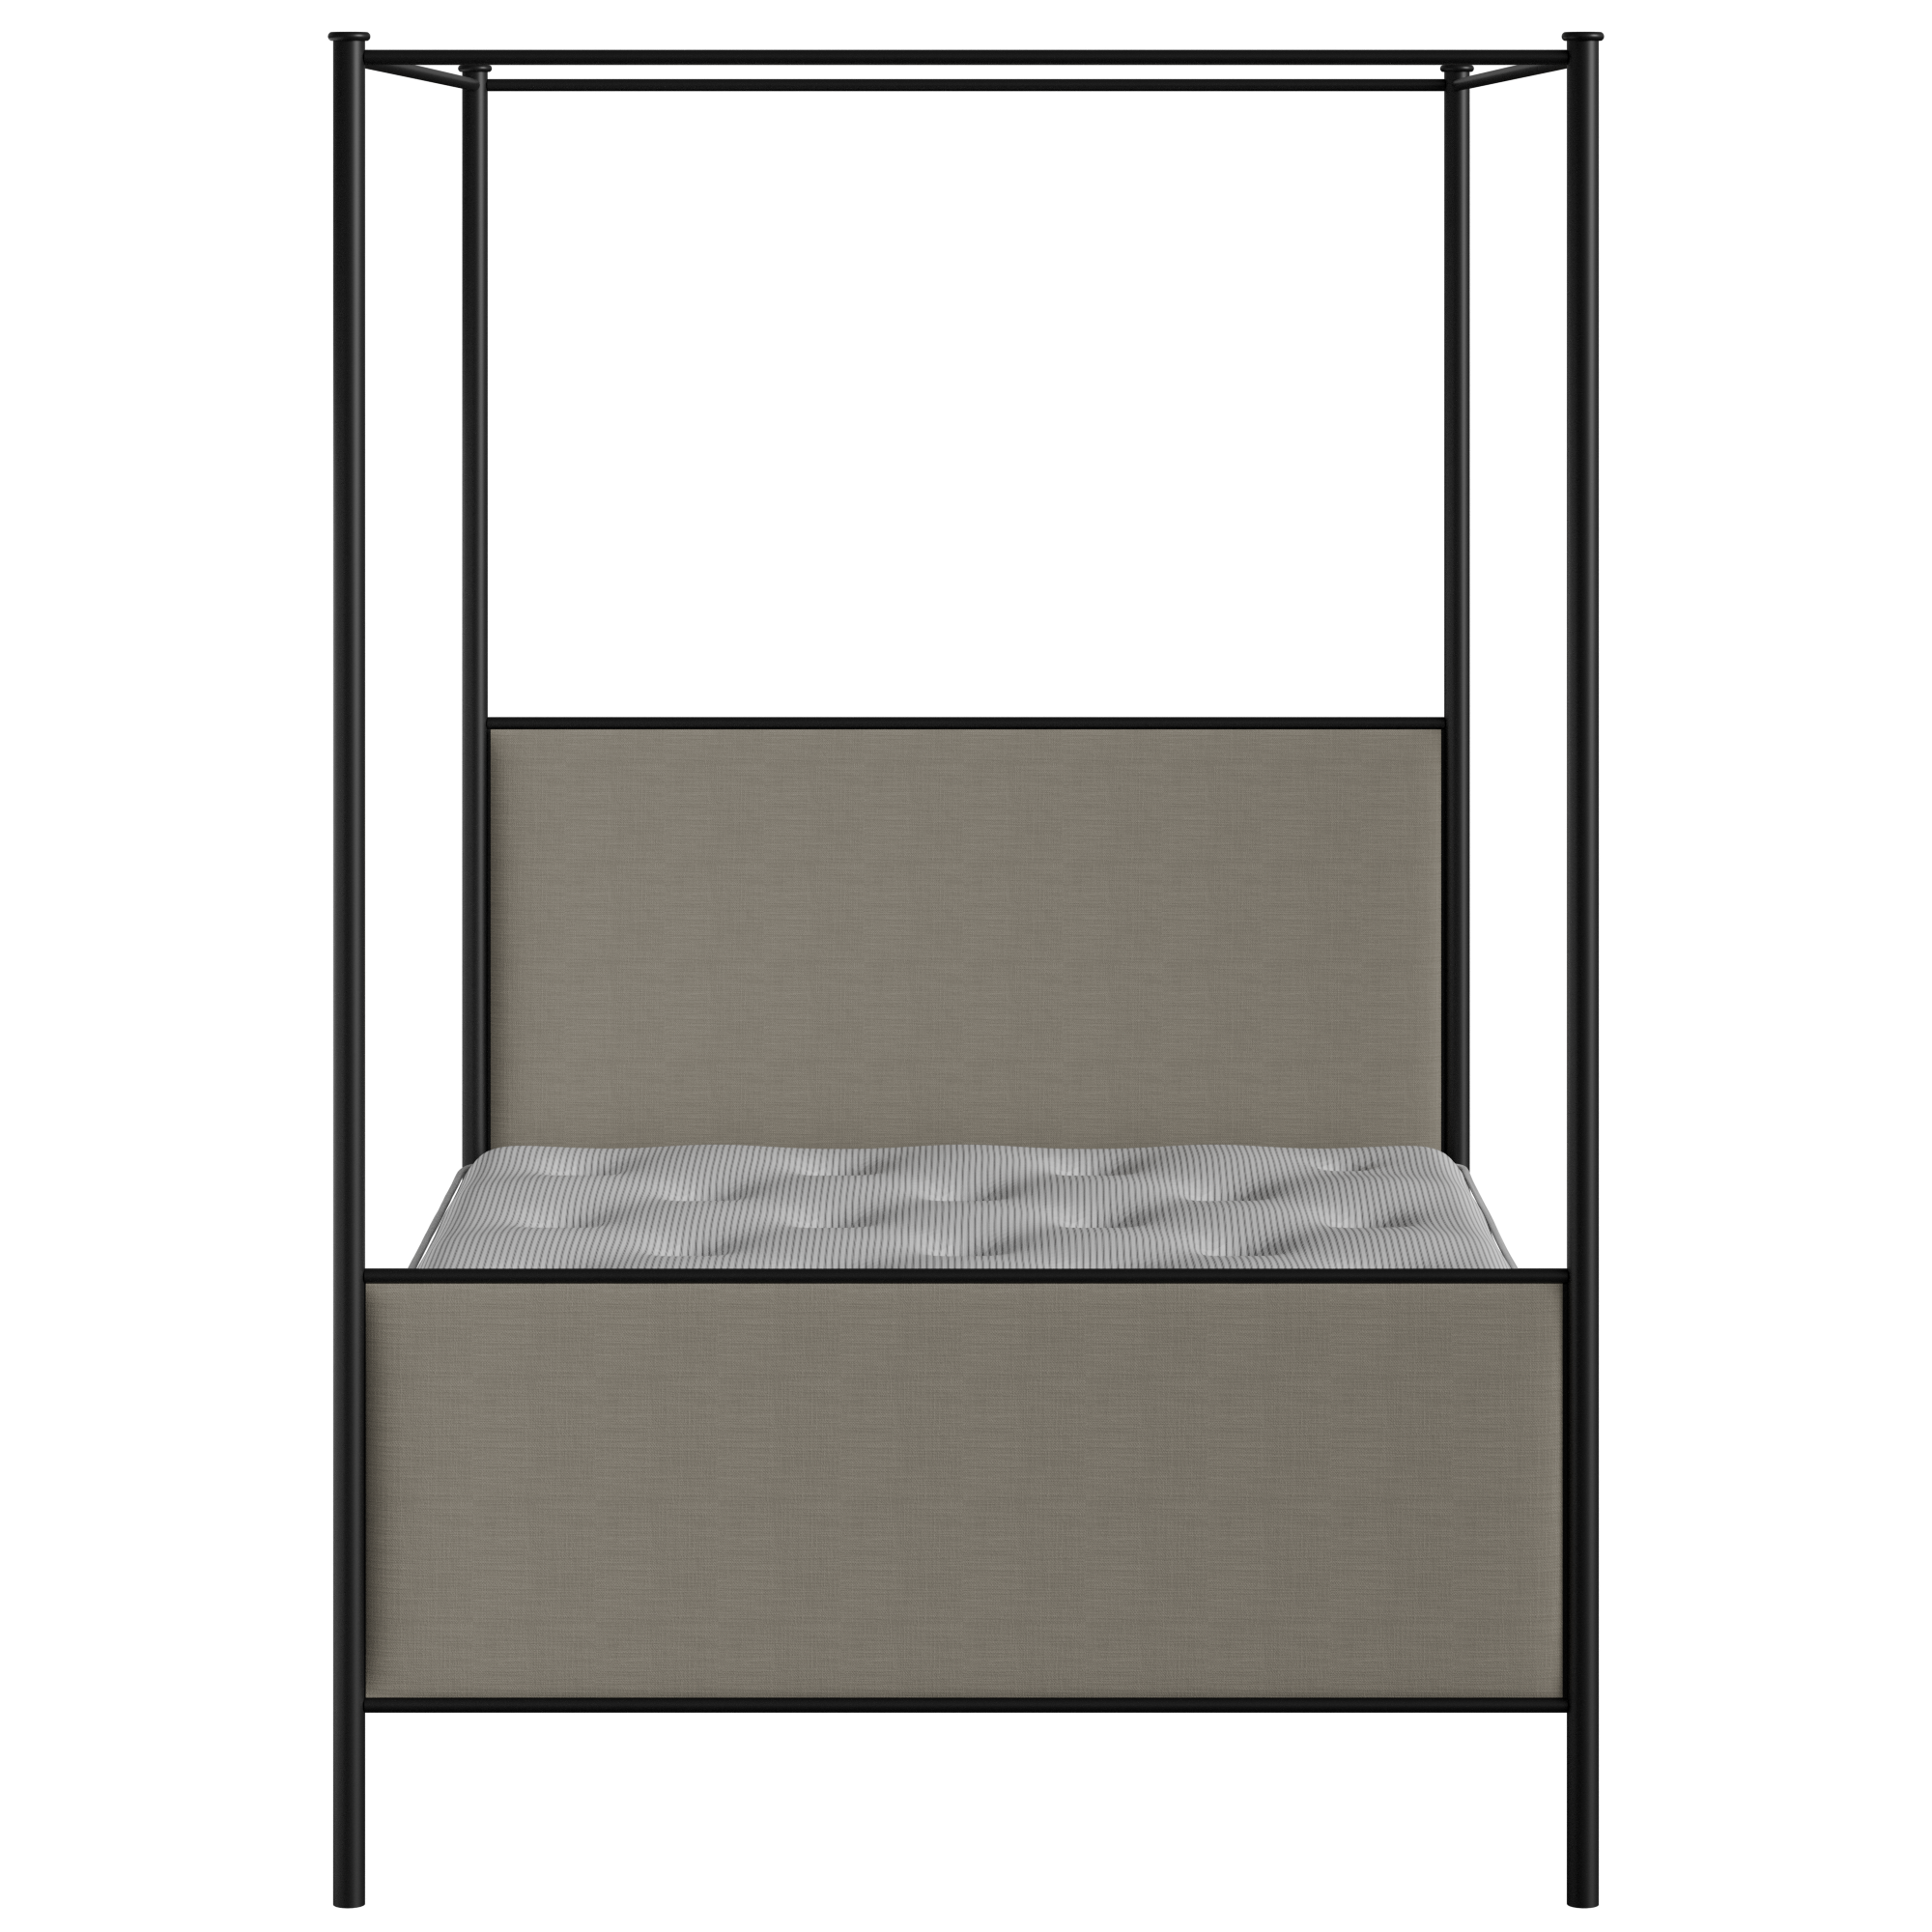 Reims iron/metal upholstered bed in black with grey fabric